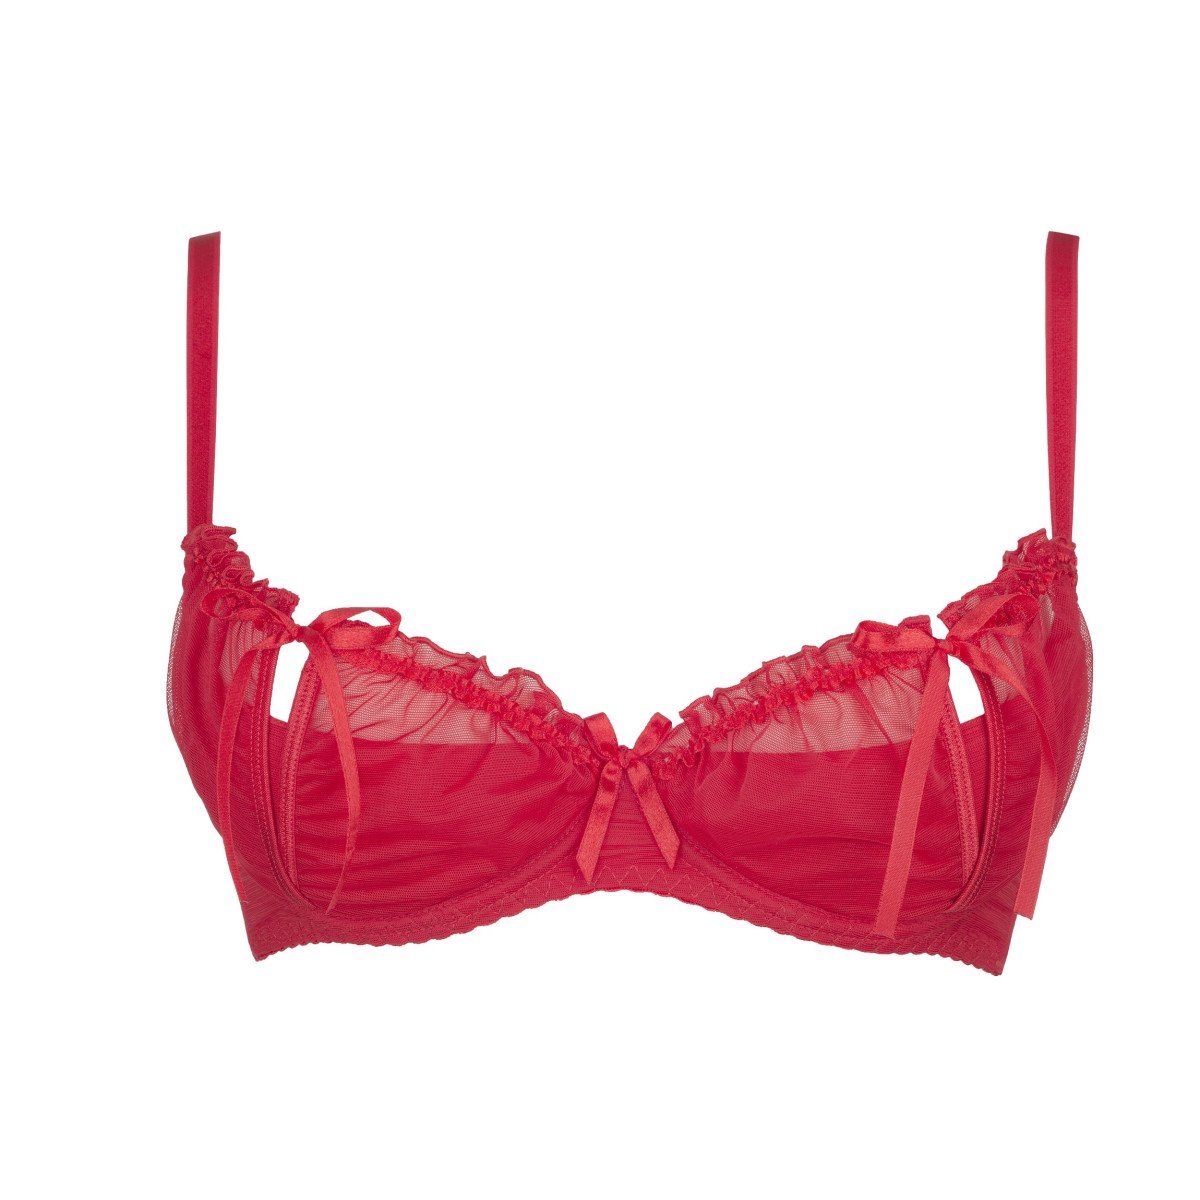 Size Bustier bra - (80F,95E,85E,85F,90B,90C,90D) Plus Axami Plus V-8741PS red Size